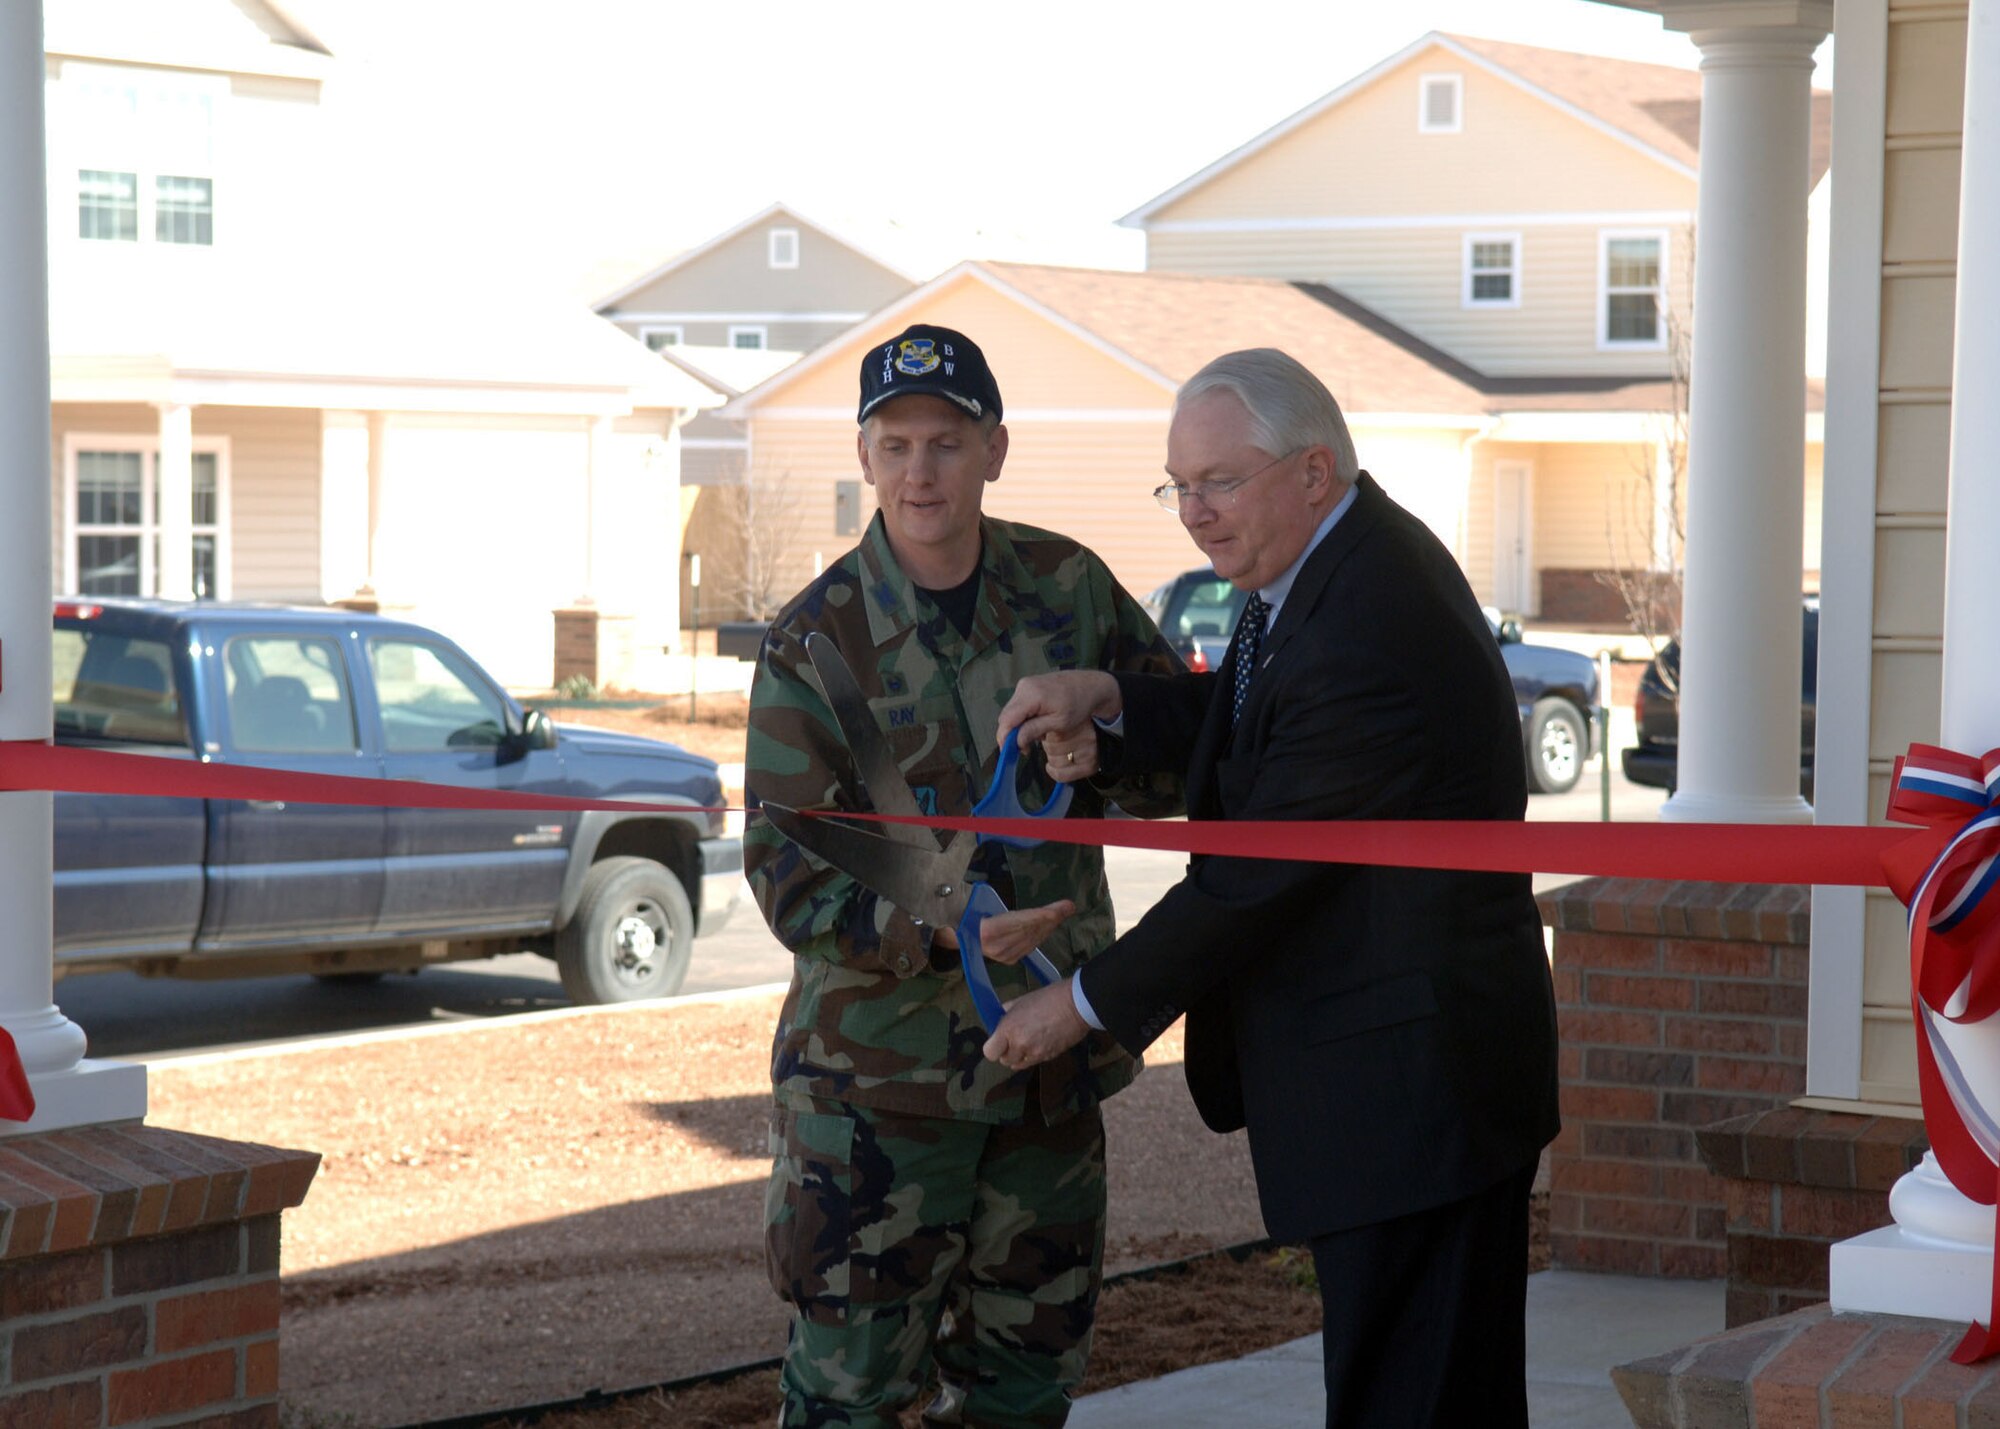 DYESS AFB, Tx-- Colonel Timothy Ray and Congressman Randy Neugebauer cut the ribbon to the new base housing area on Feb. 22. The pictured was given to Airman 1st Class Xavier Crox's family.  (U.S. Air Force Photo by Airman 1st Class Micheal Breaux)